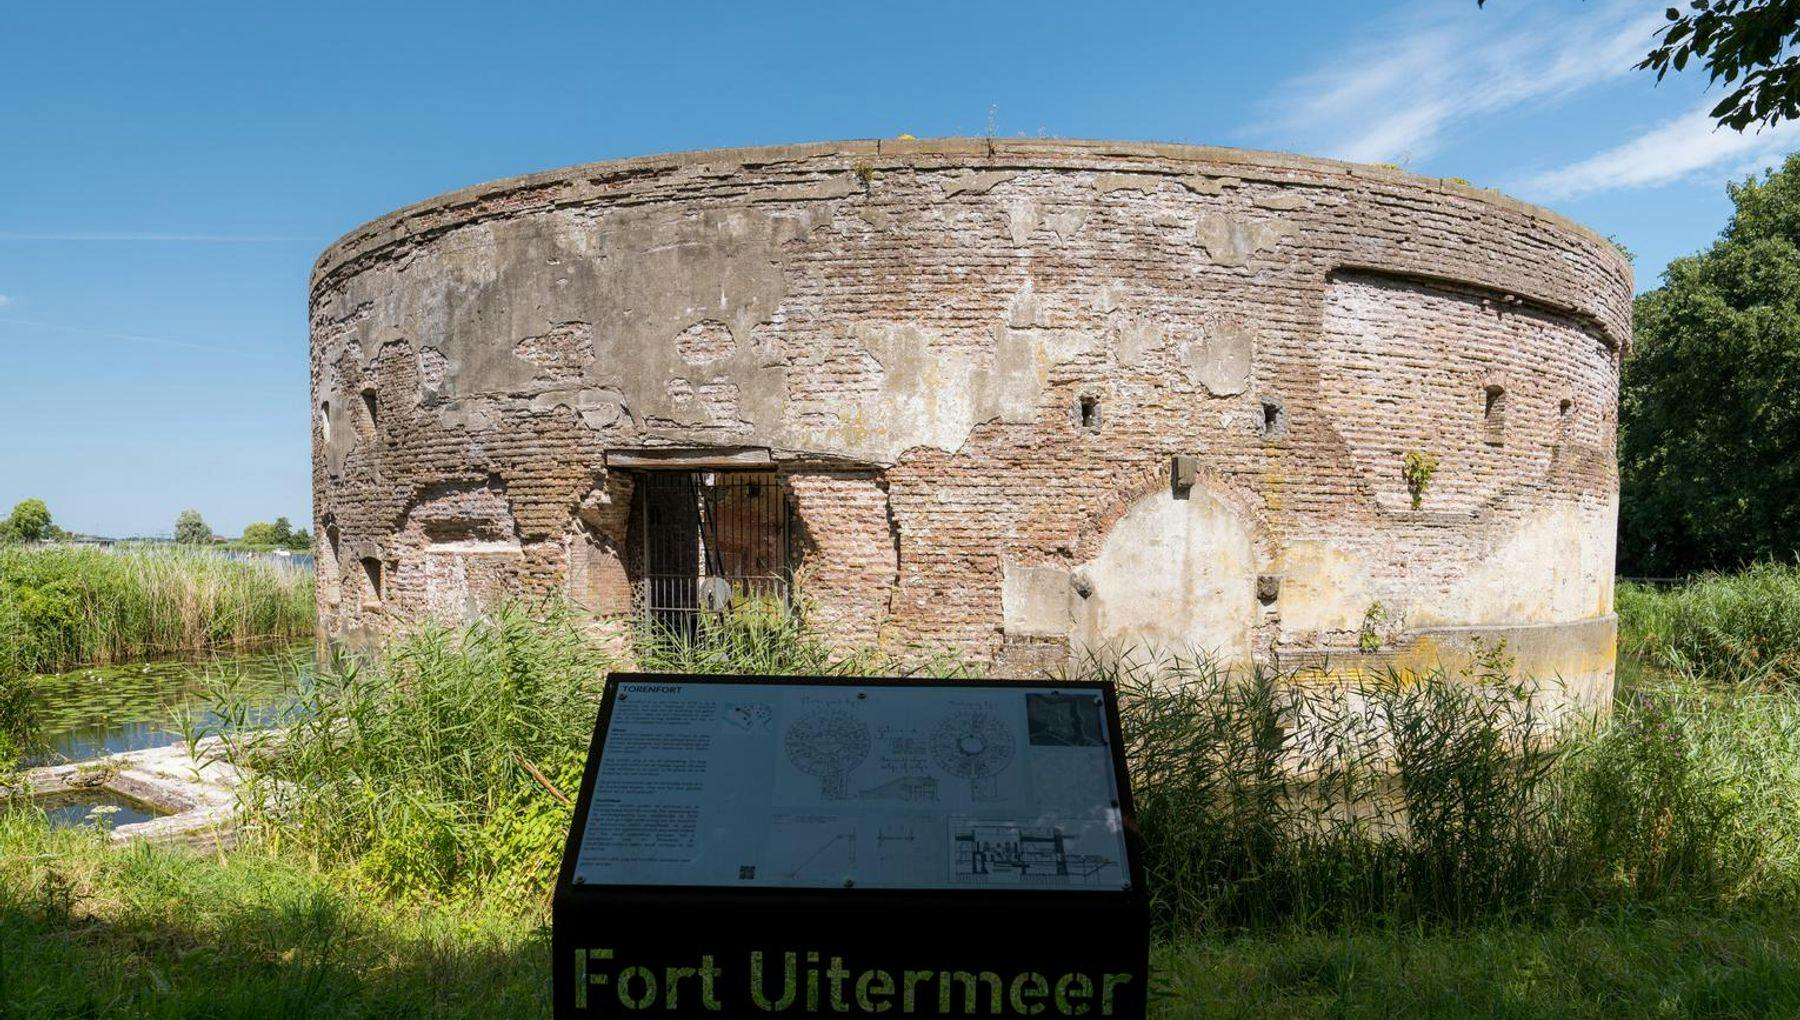 Fortress Uitermeer, part of the Defense line of Amsterdam.